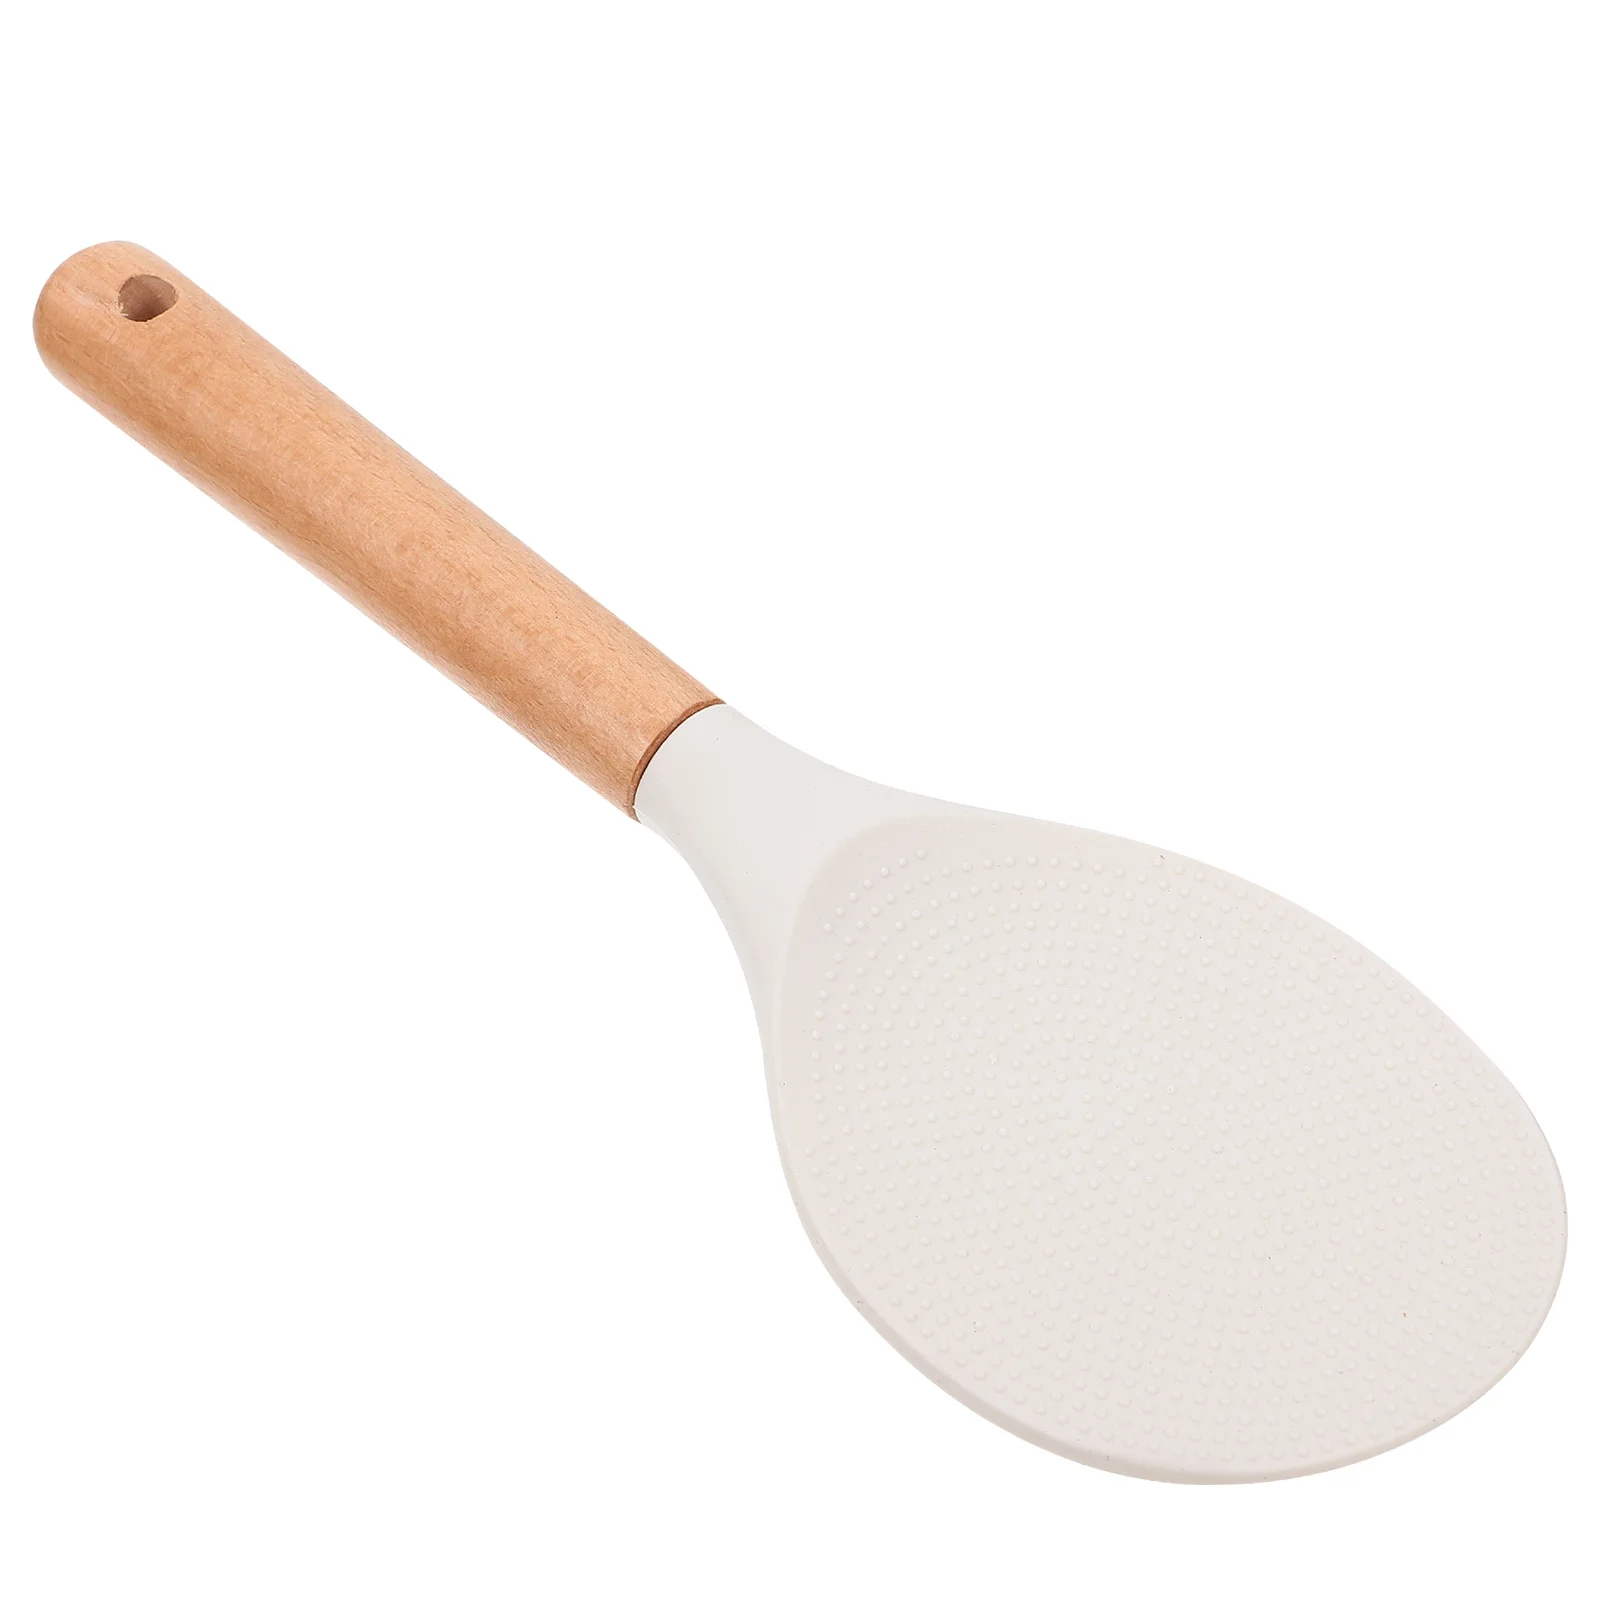 

Rice Paddle Spoon Silicone Spatula Serving Cooking Spoons Scooper Non Stick Utensils Sushi Chinese Scoop Asian Kitchen Paddles